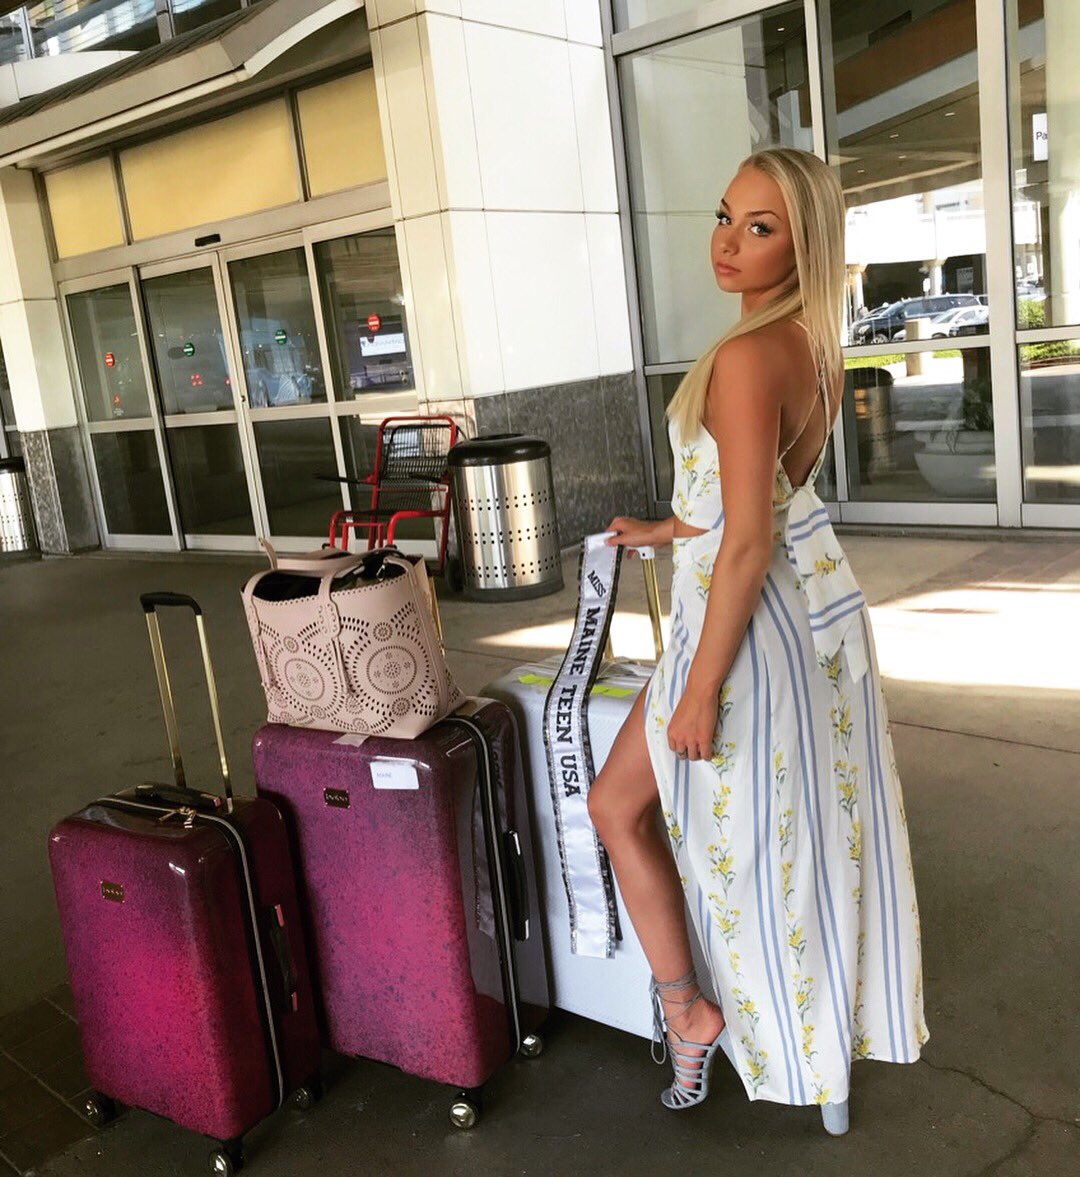 I’ve landed and I’m ready for you #MissTeenUSA @MissUSA !! Can’t wait to see all of my girls tomorrow! Let’s do this! 😆👑💛☀️✈️✨ @MissUSAStatePag #MissTeenUSA #roadtomissteenusa #clementeorganization #gameface #letsdothis #maine #confidentlybeautiful #justbeyou